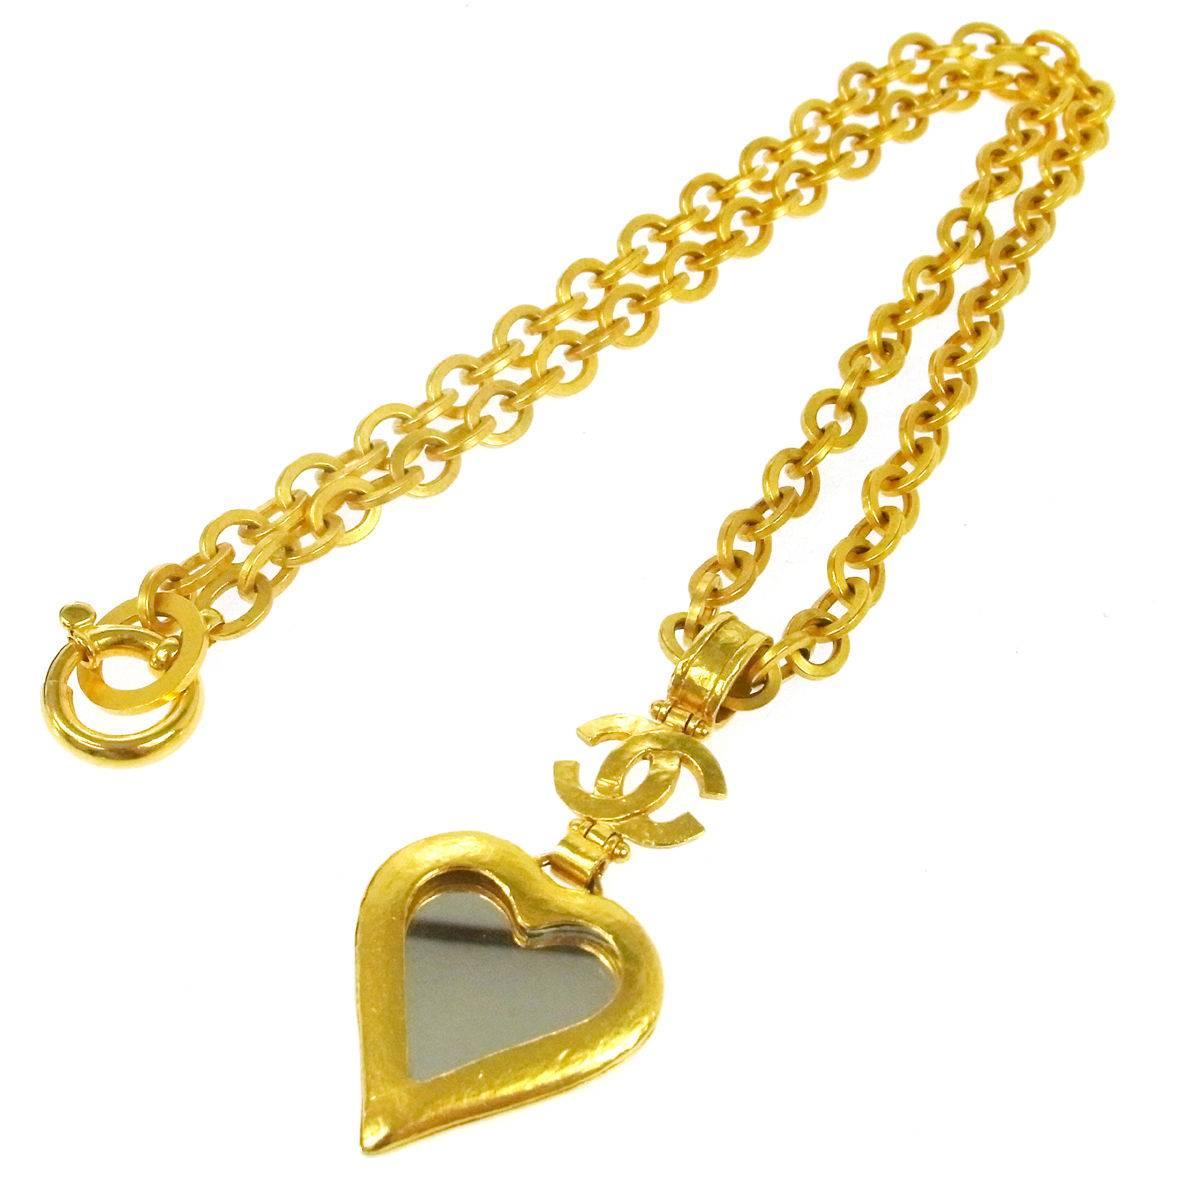 Chanel Rare Vintage Gold Pendant Charm Long Link Necklace in Box